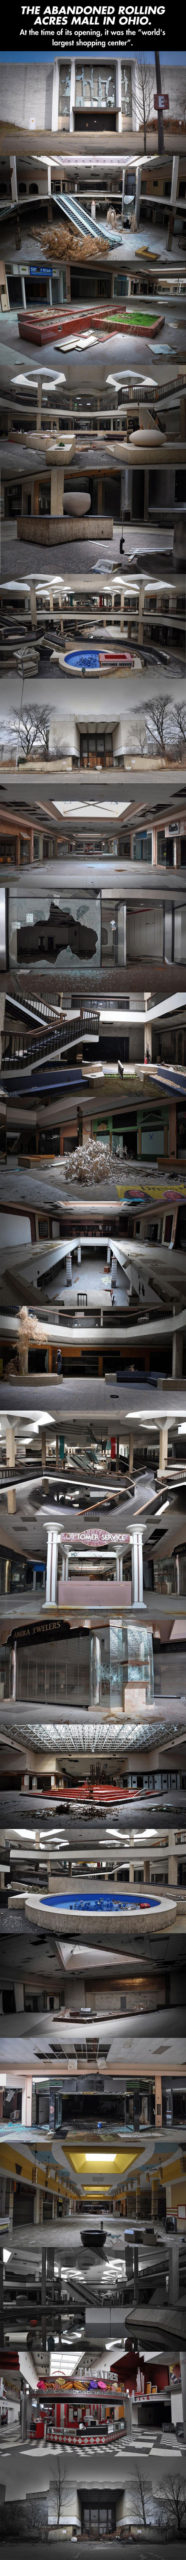 Abandoned+Mall+In+Ohio